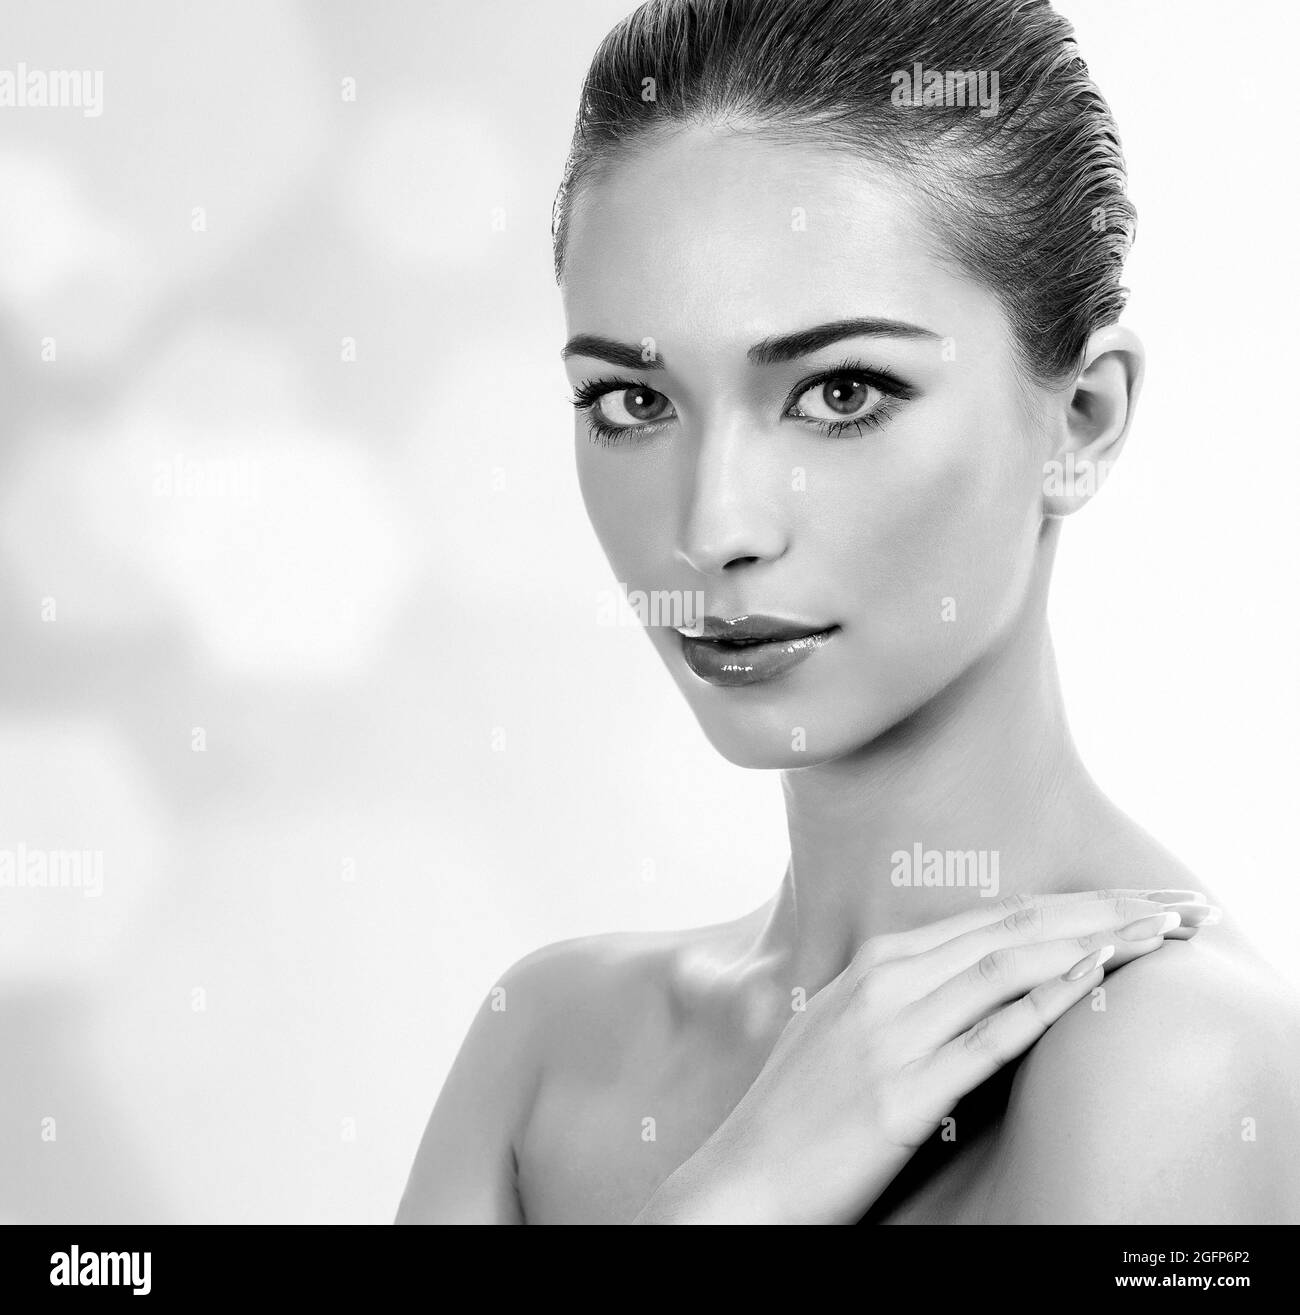 Pretty woman against an abstract background with circles and copyspace Stock Photo